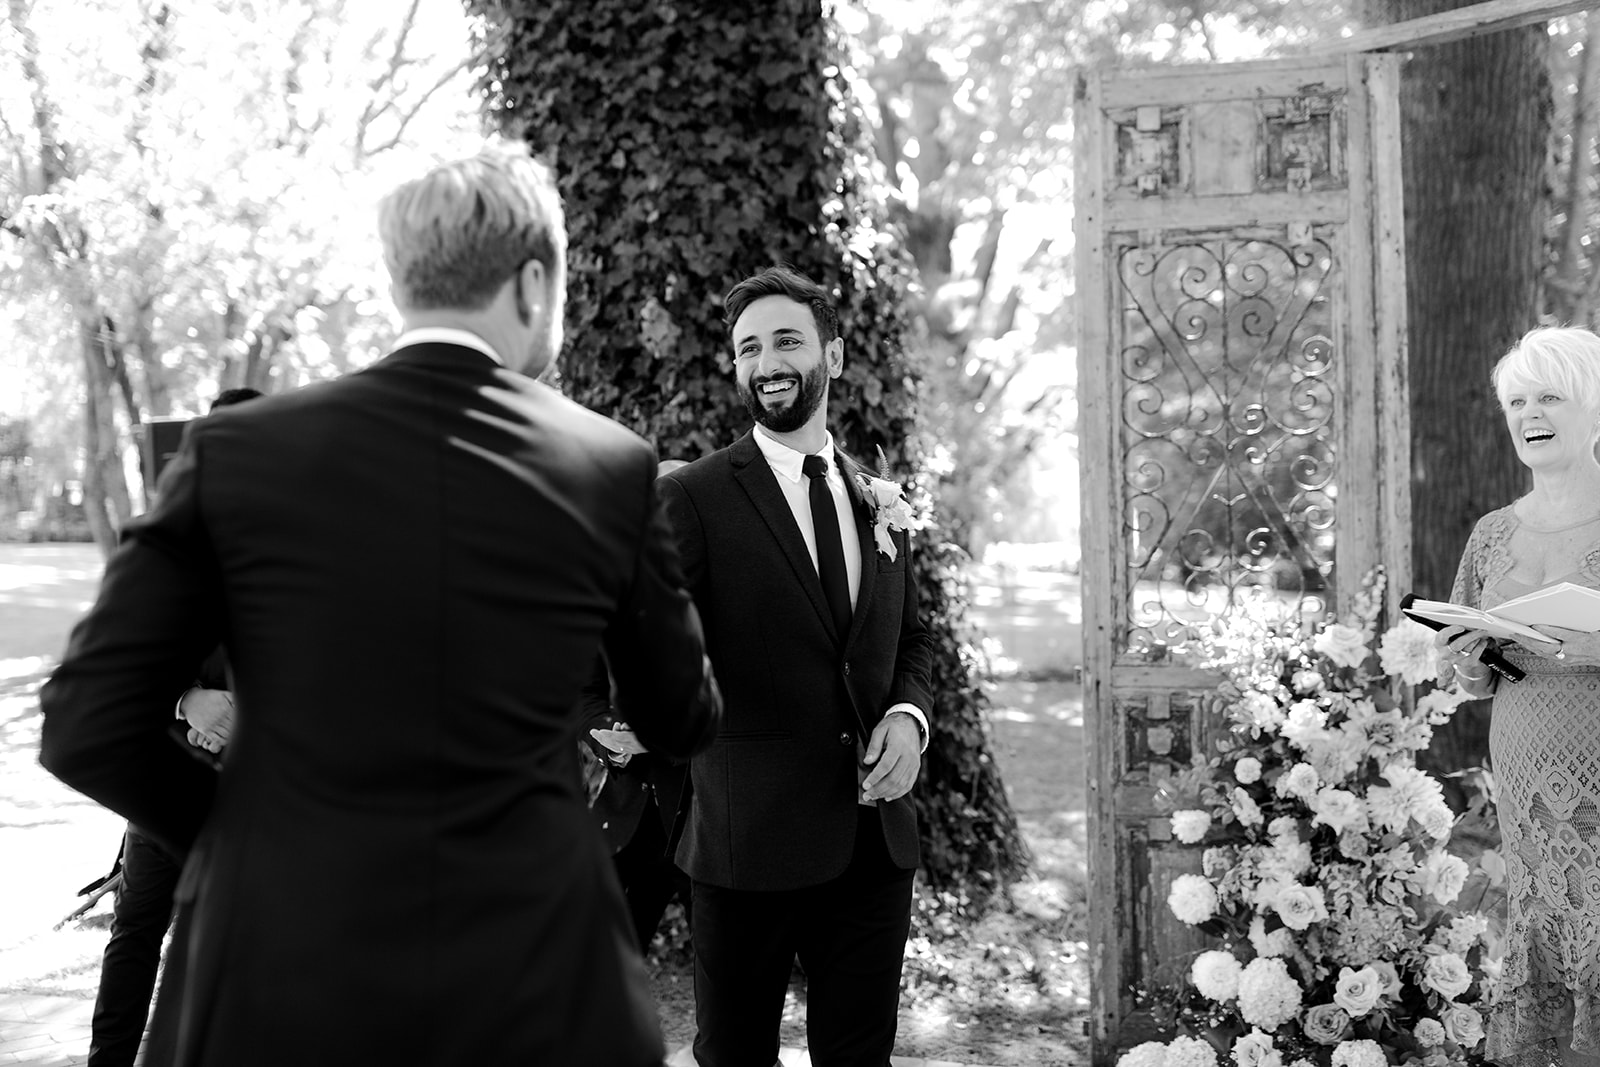 Groom welcoming floral man at the end of the aisle at an elegant country wedding.